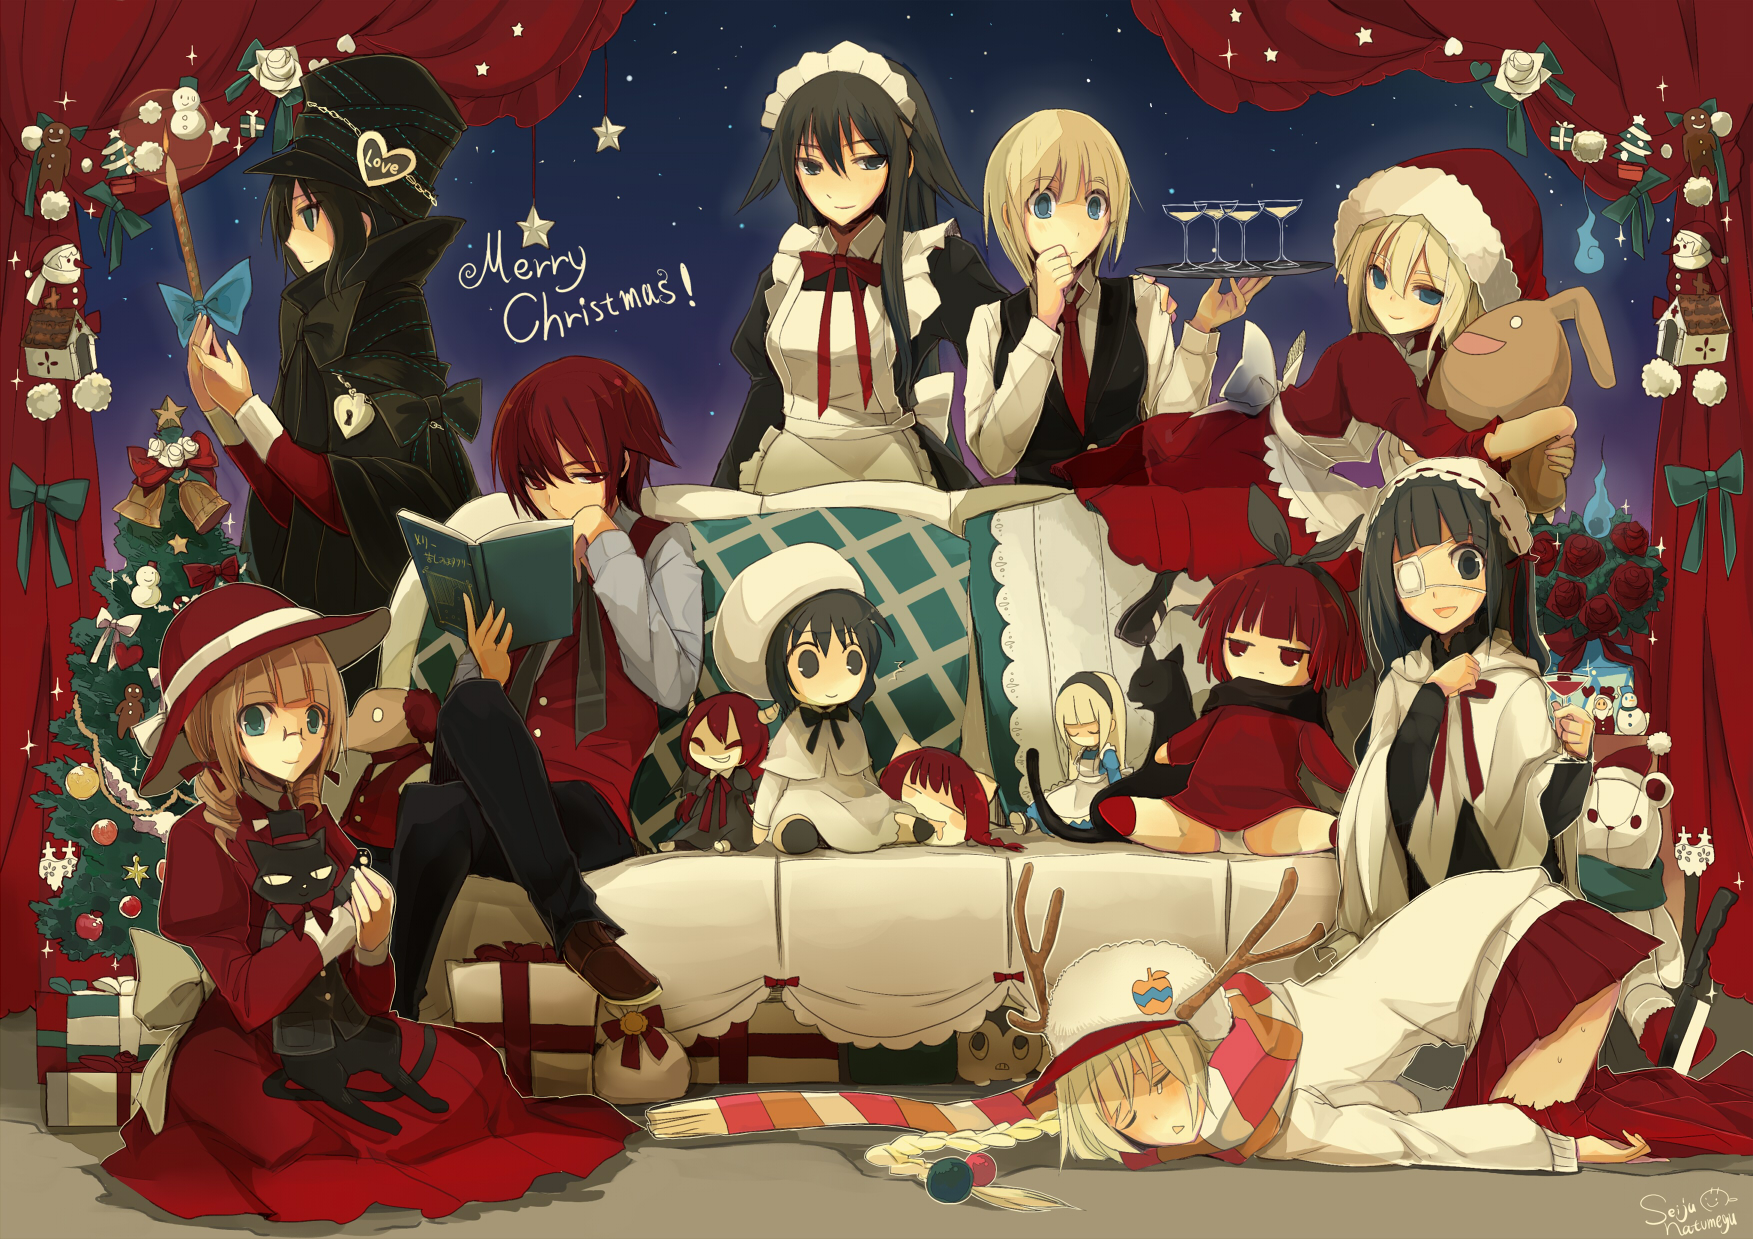 animal, Book, Bow, Cat, Christmas, Dress, Eyepatch, Flowers, Glasses, Group, Hat, Horns, Long, Hair, Maid, Night, Original, Red, Eyes, Red, Hair, Ribbons, Rose, Stars, Weapon Wallpaper